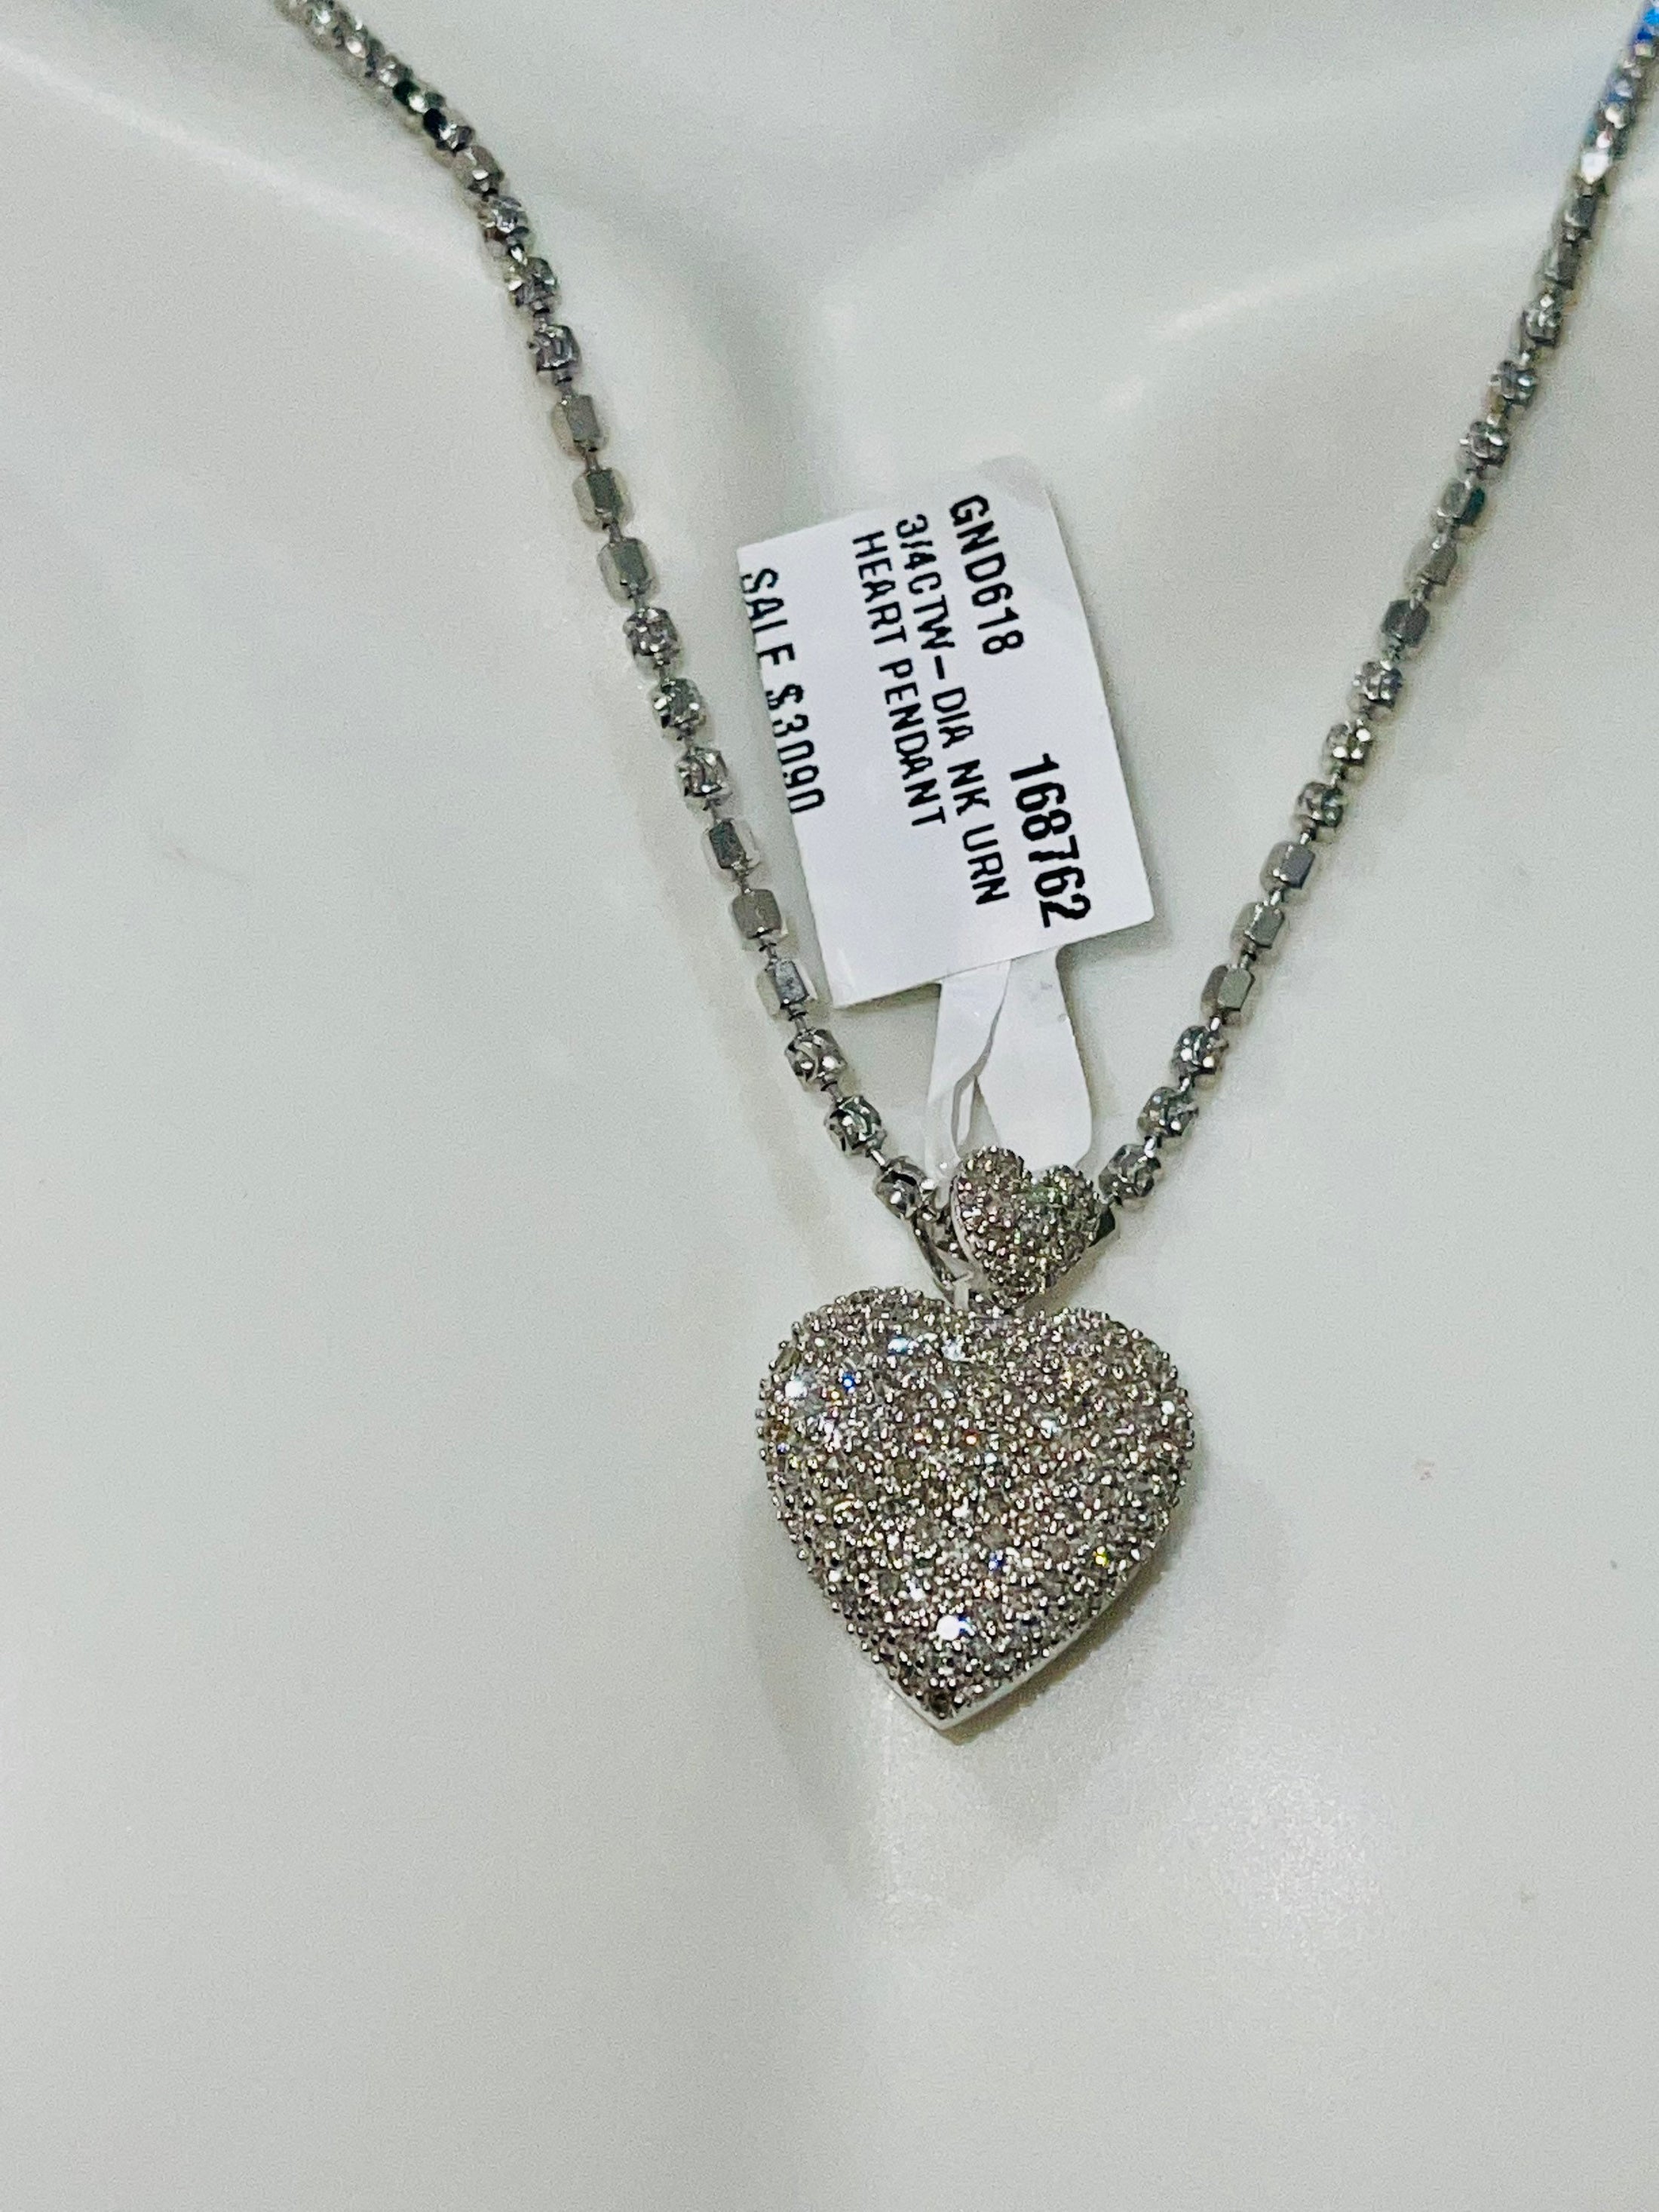 Real White Gold Urns | Real Diamond Cremation Urn | Urn Necklace For Ashes 10k solid Gold | Cremation Necklace | Keepsake Heart Urn jewelry